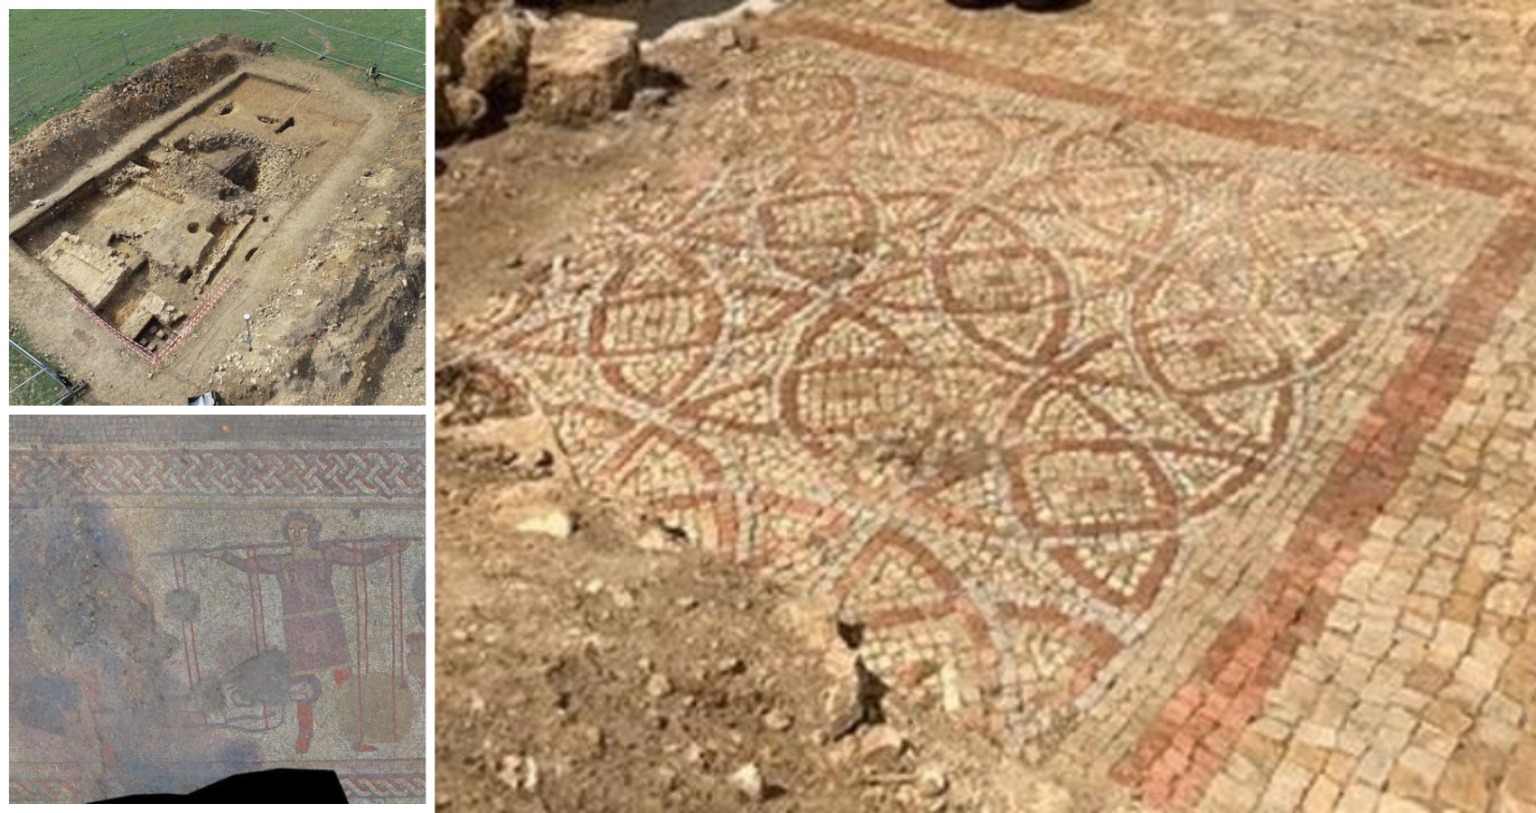 Archaeologists uncovered a second mosaic in Rutland Roman villa in England